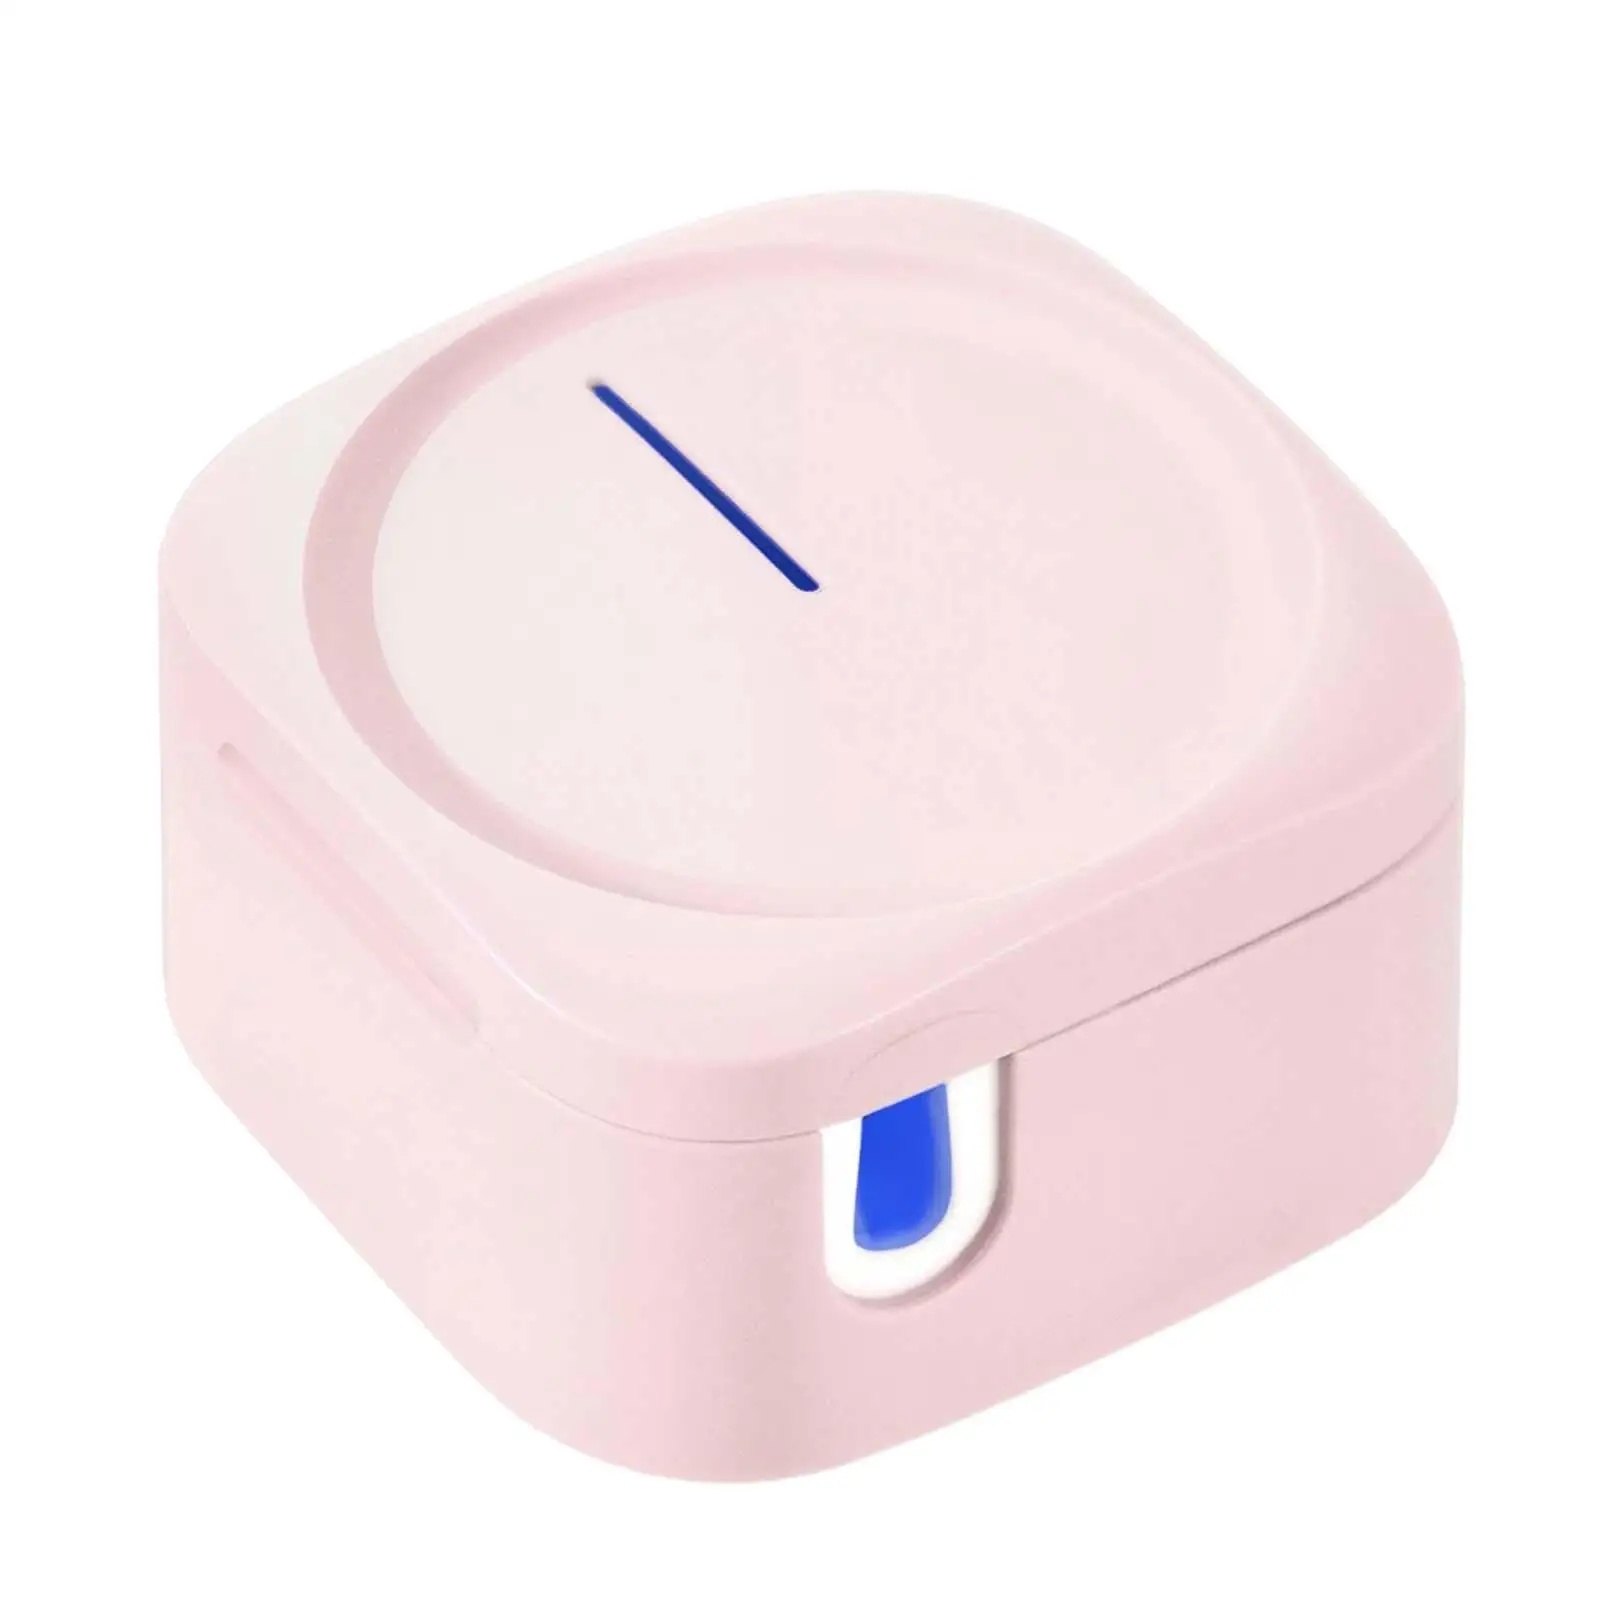 Mini Toothbrush Cleaner Box Portable Electric USB Rechargeable Toothbrush Case Holder for Home Travel Business Bathroom Wall